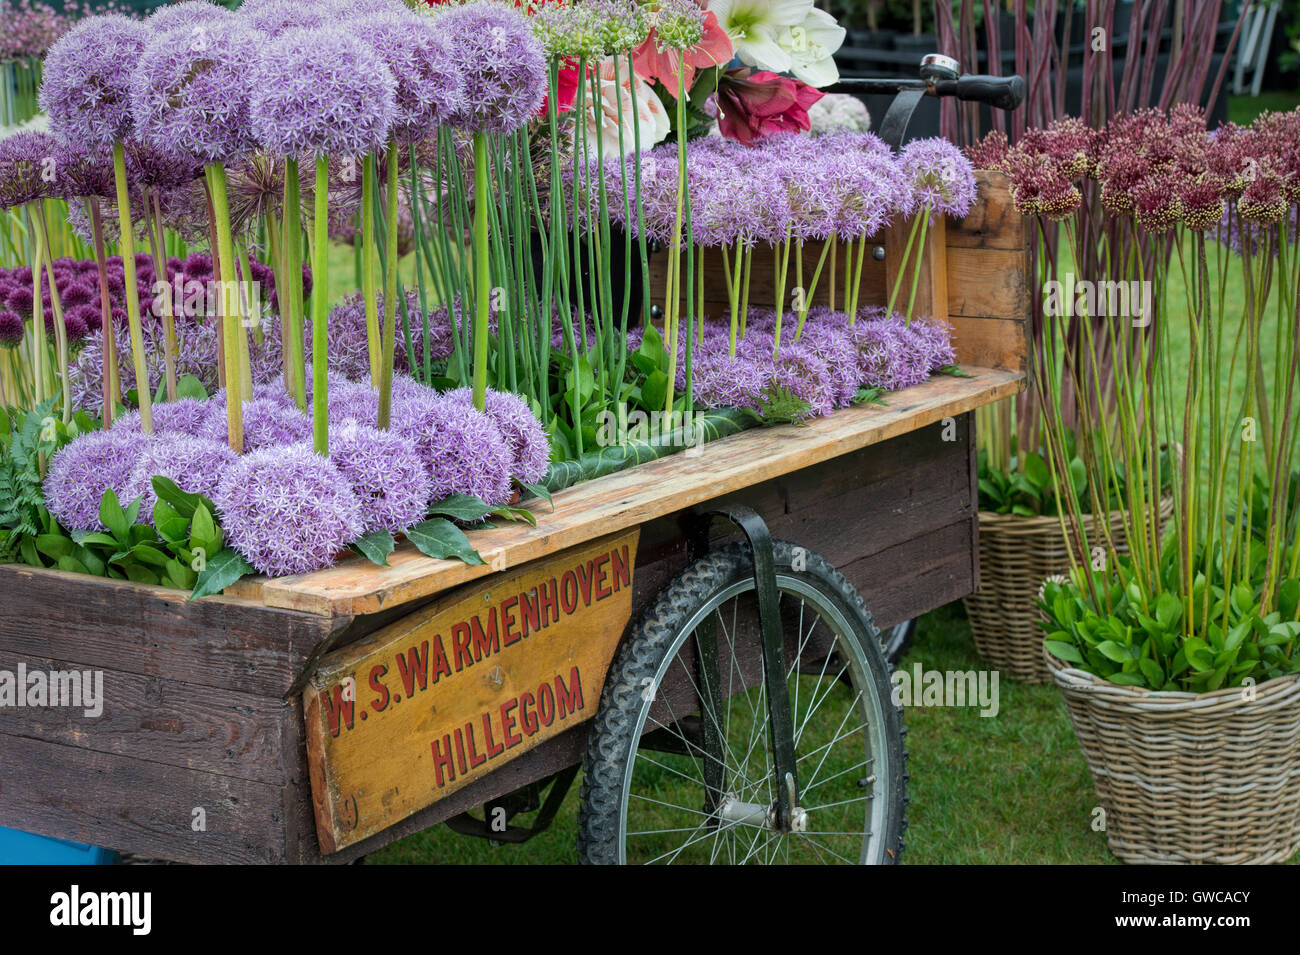 Allium flowers in a wooden cart display at a flower show. UK. Ornament onion display Stock Photo